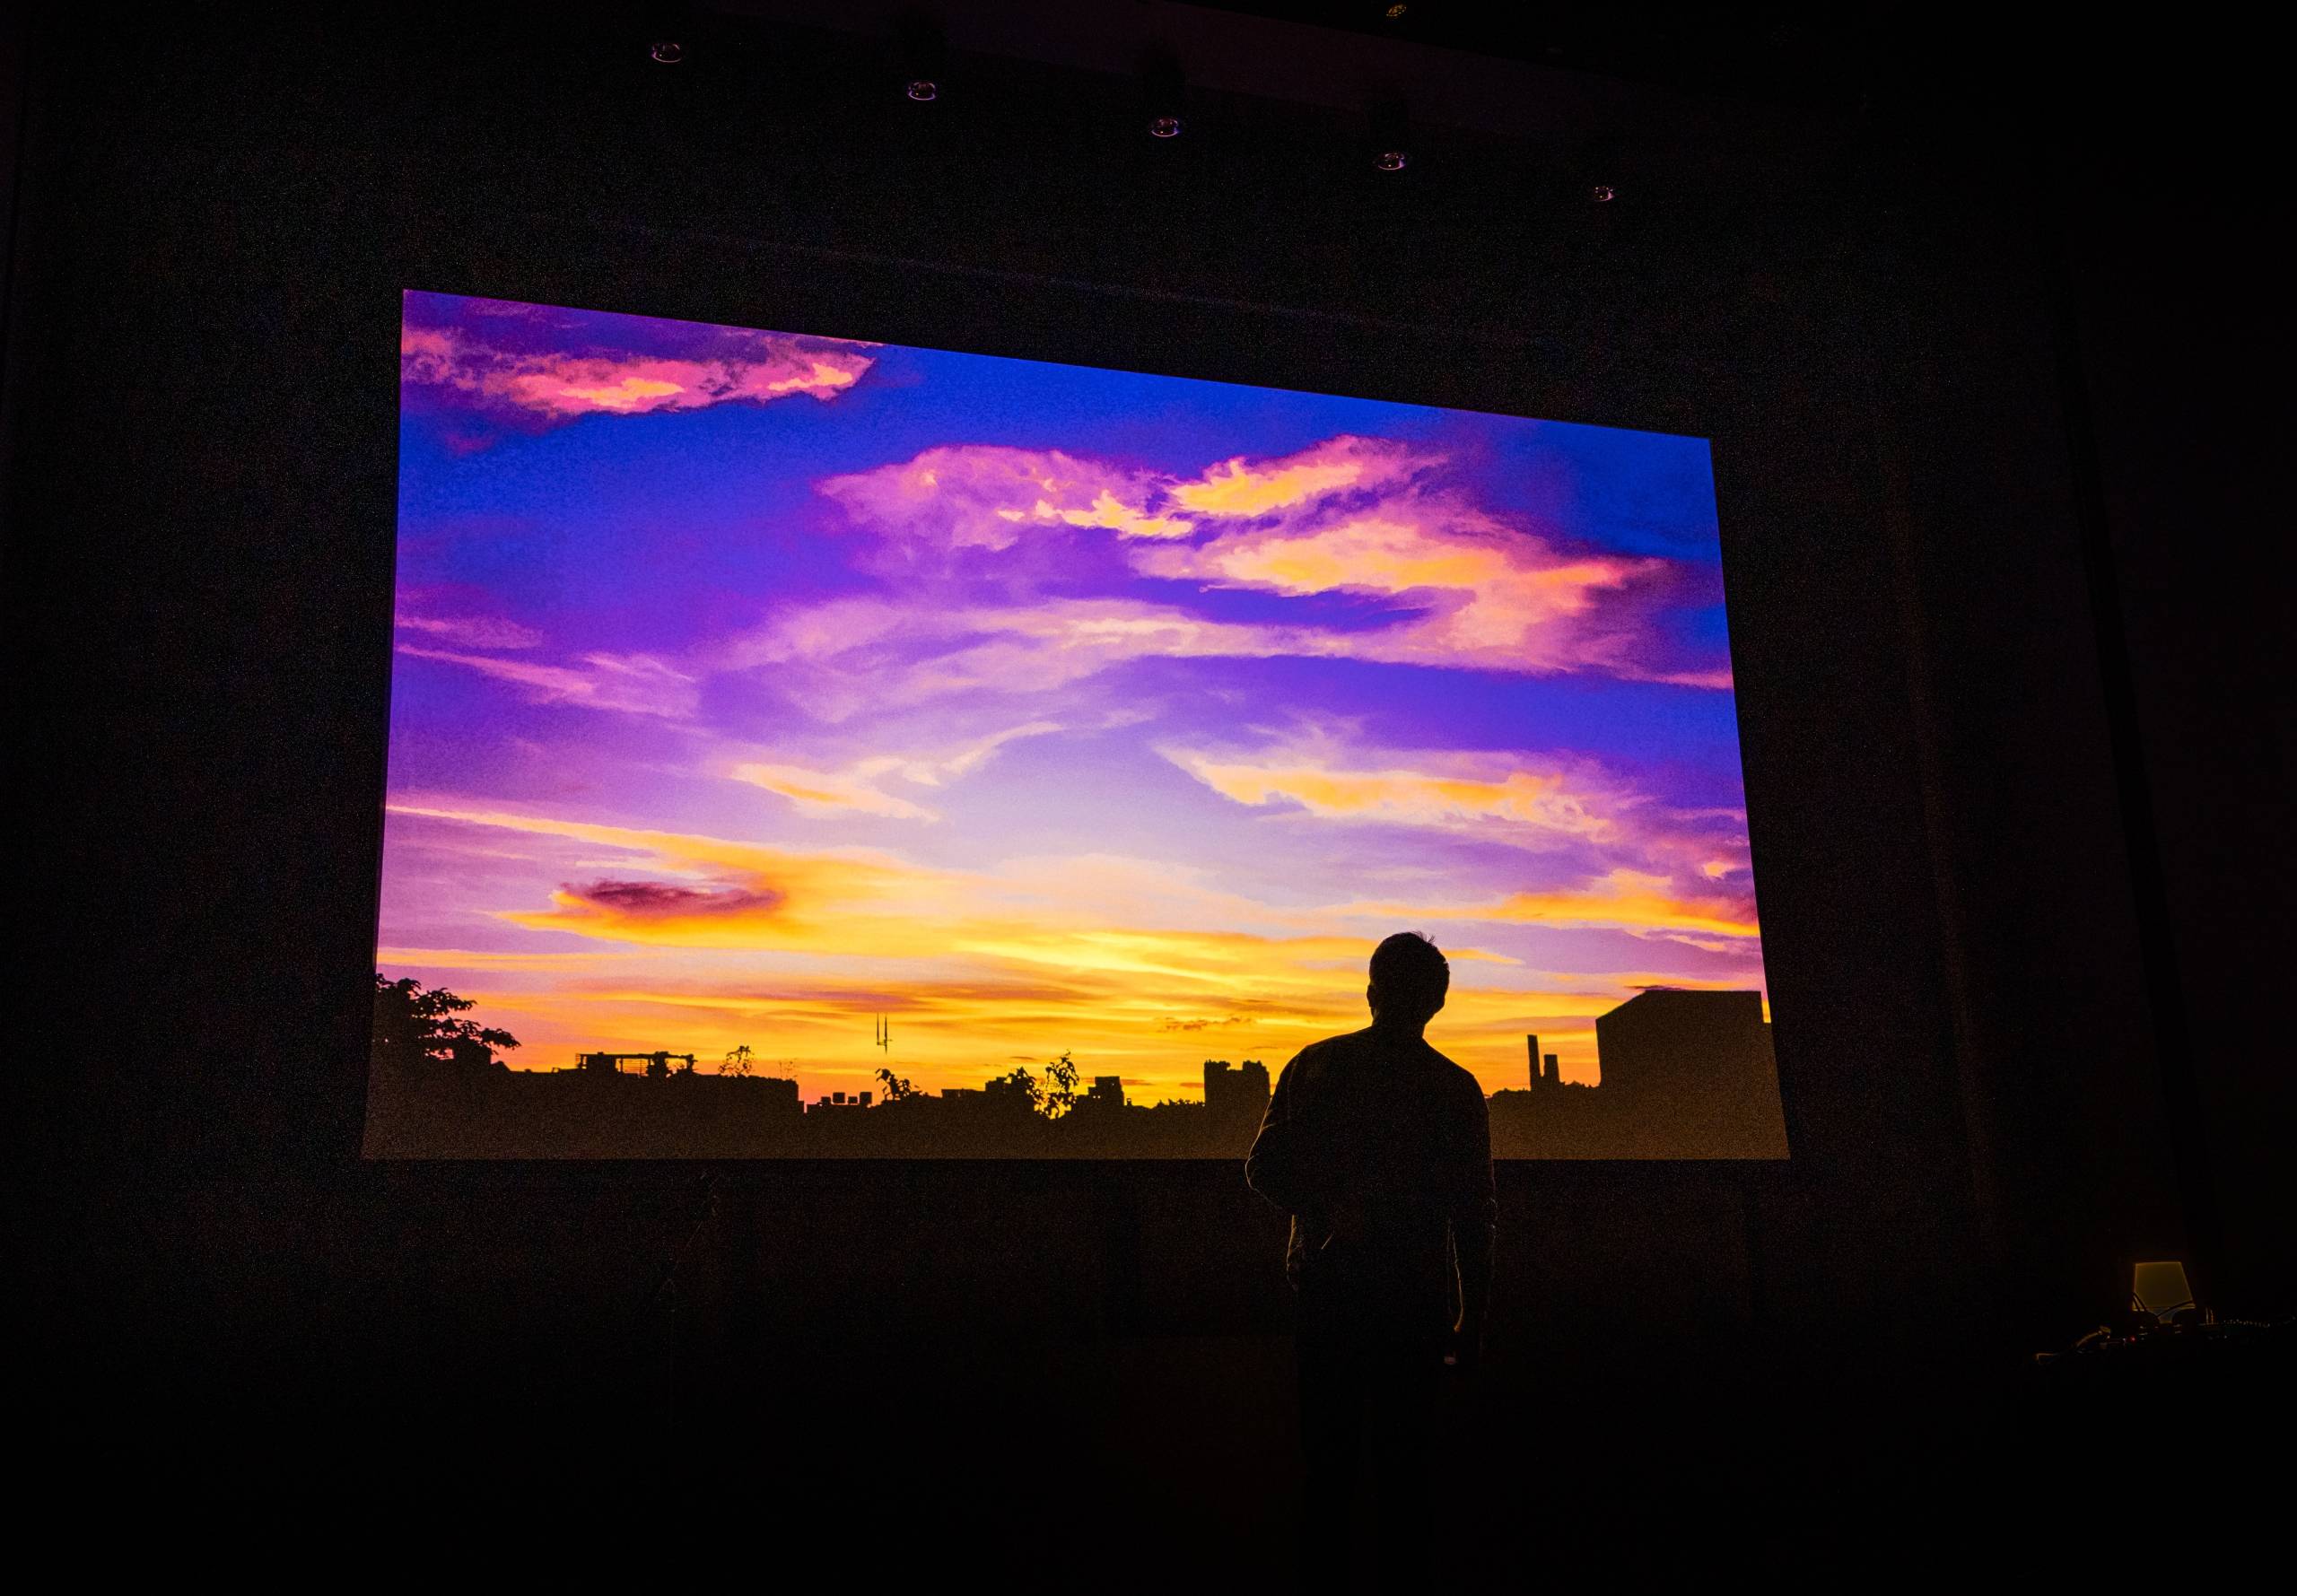 a projected screen shows an image of a sunset in Brooklyn with vibrant shades of blue, purple, orange, and yellow foregrounded by the silhouette of a person staring at it